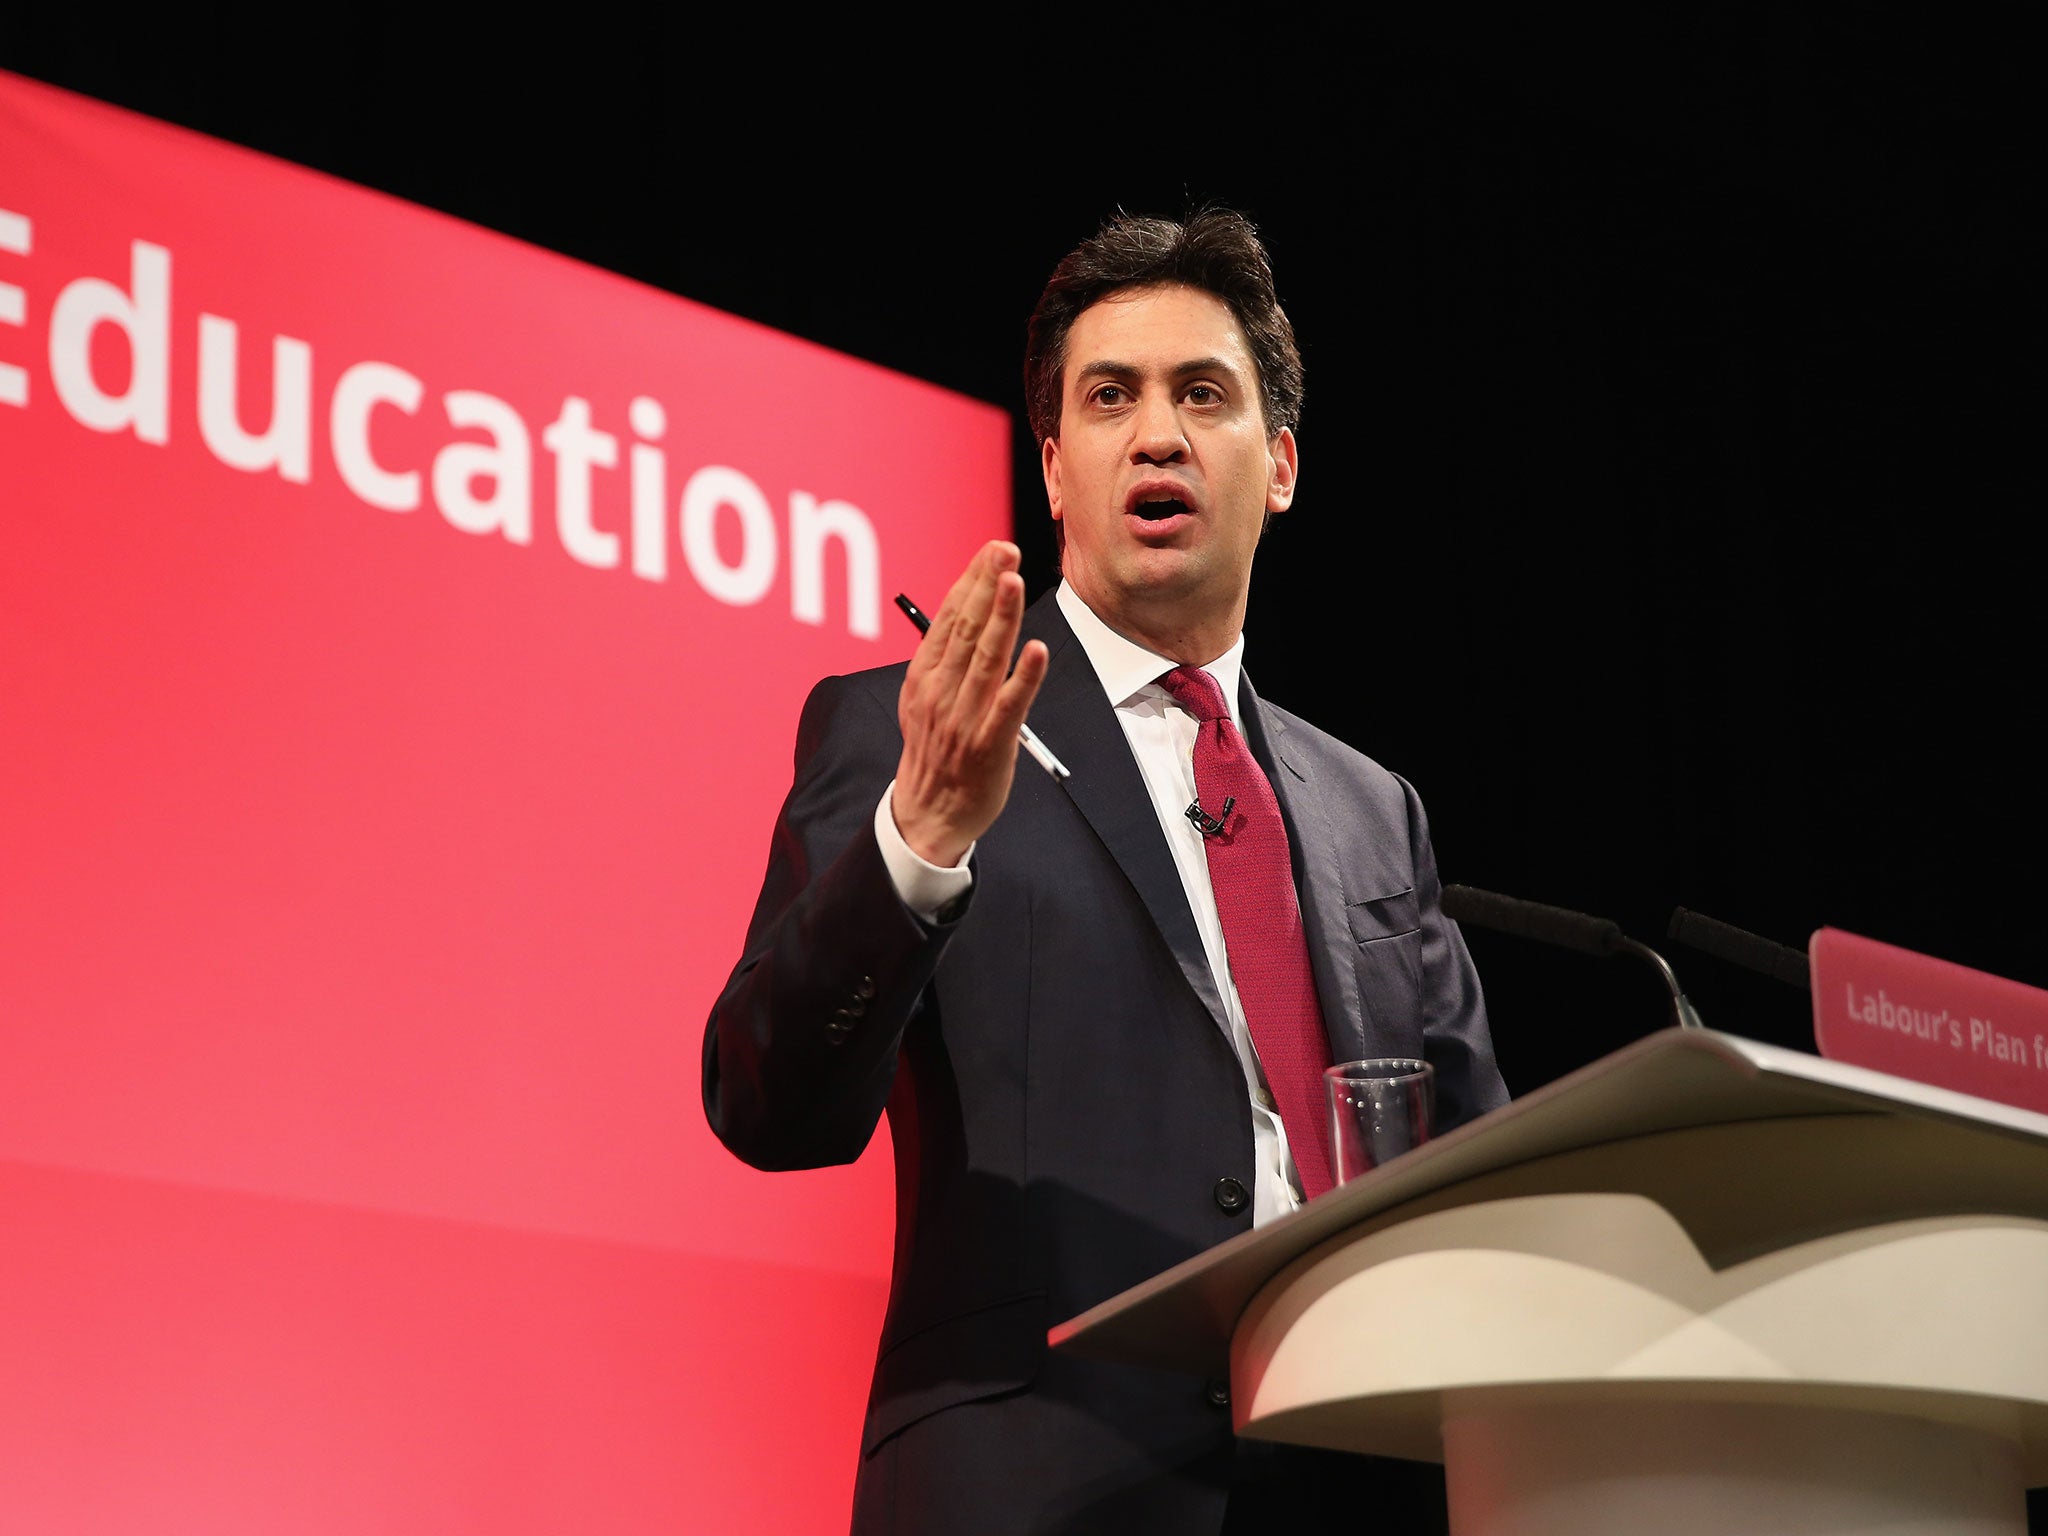 Labour leader Ed Miliband speaks to an audience at Haverstock school in Camden on February 12, 2015 in London, England